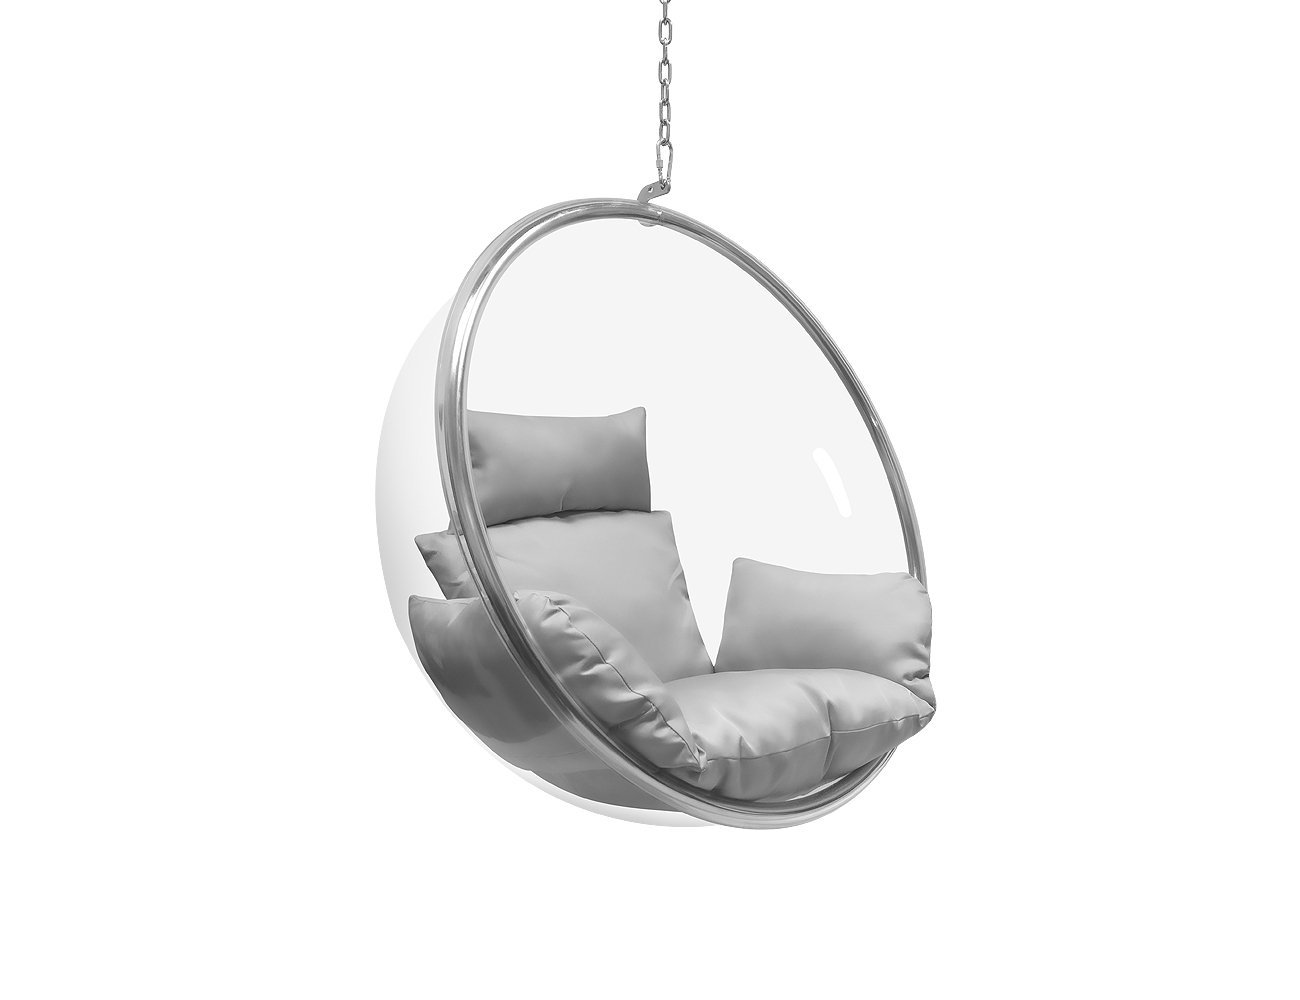 Bubble Hanging Chair @ Crazy Sales - We have the best daily deals online!